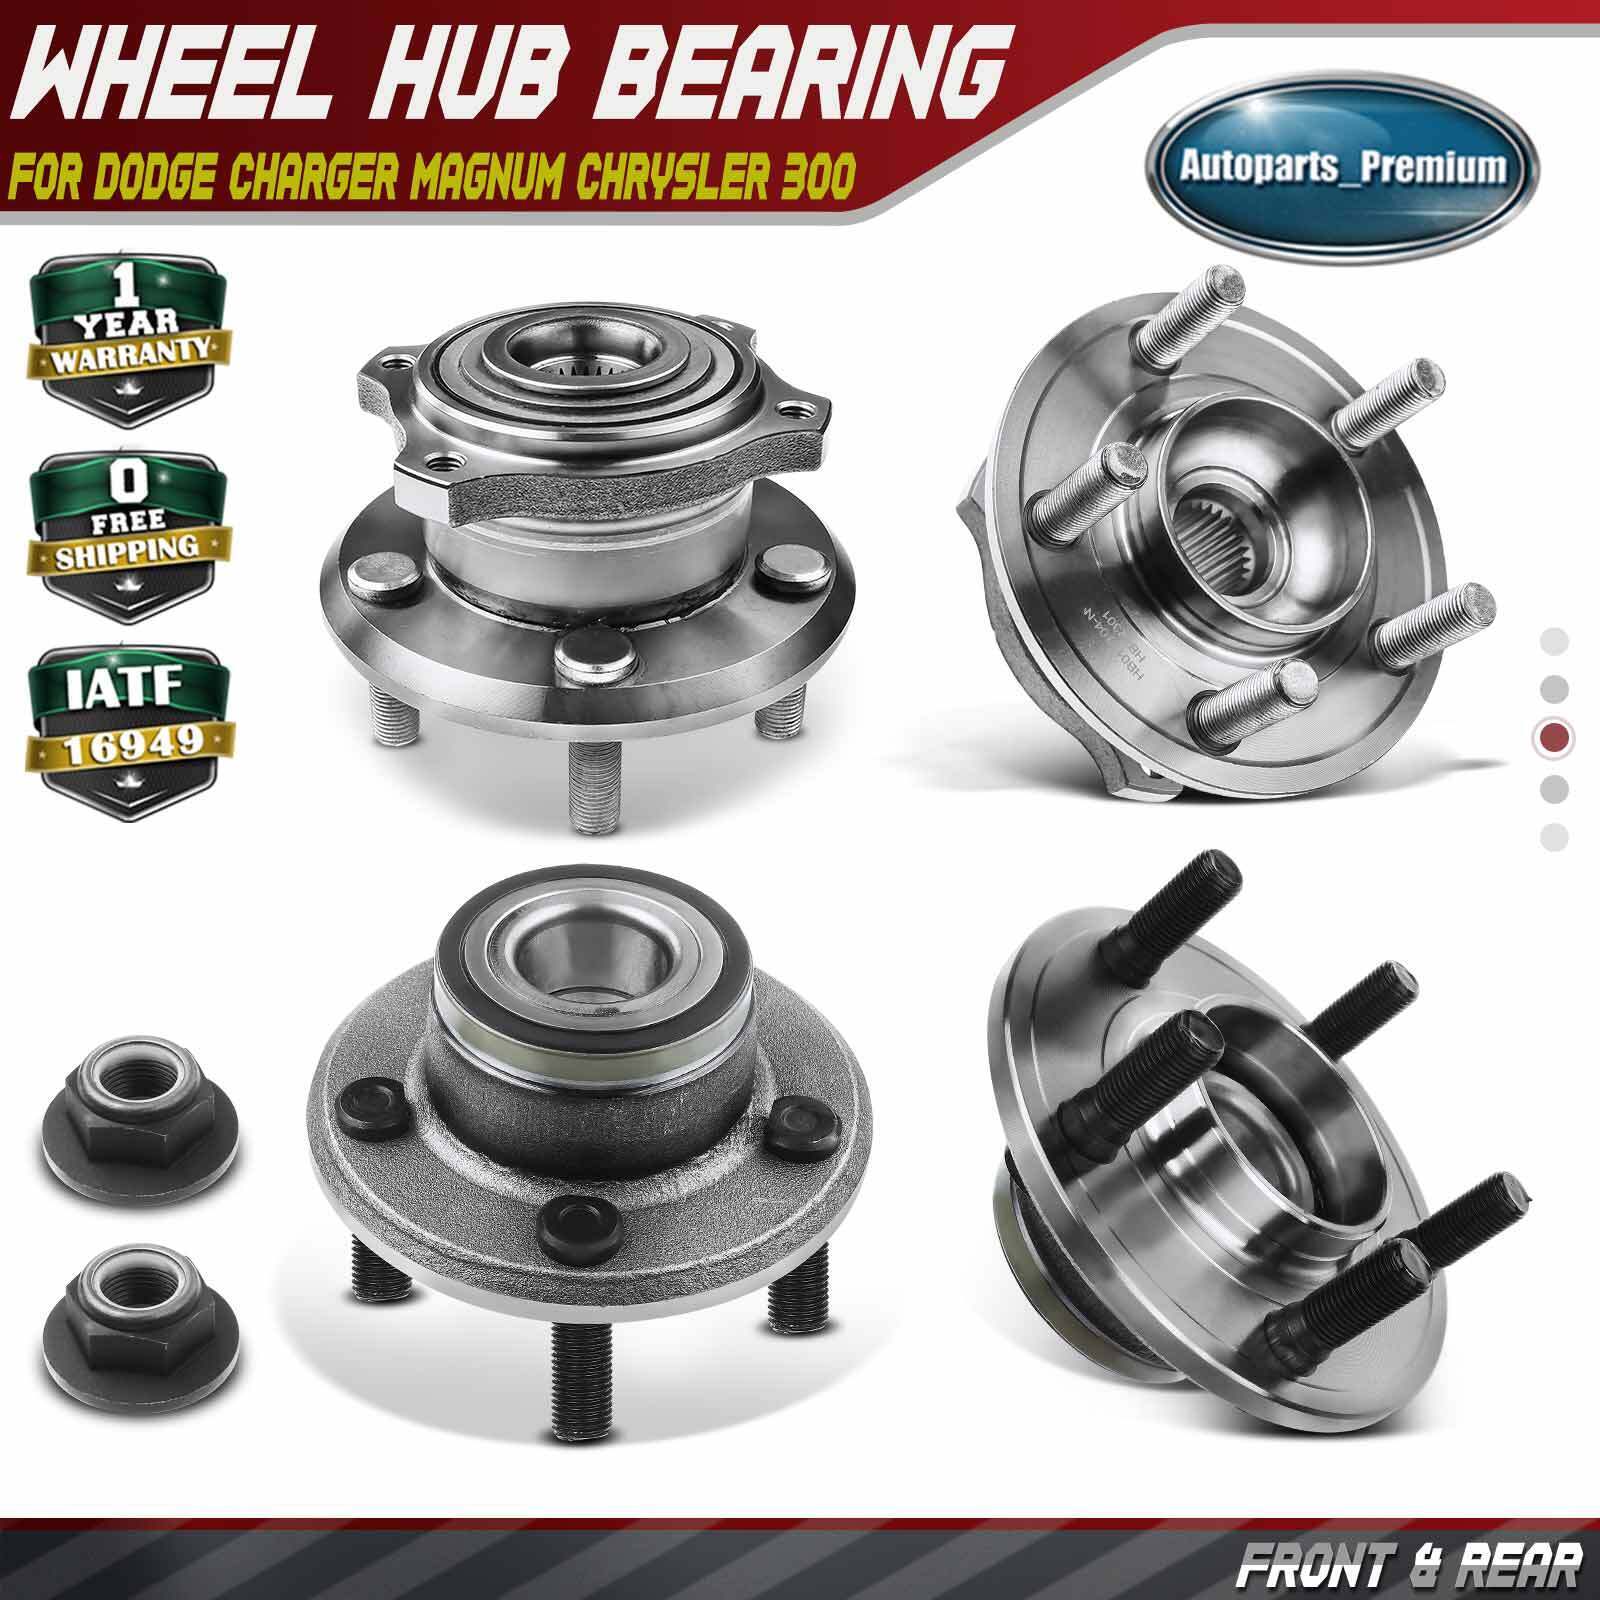 4x Front & Rear Wheel Hub Bearing Assembly for Dodge Charger Magnum Chrysler 300